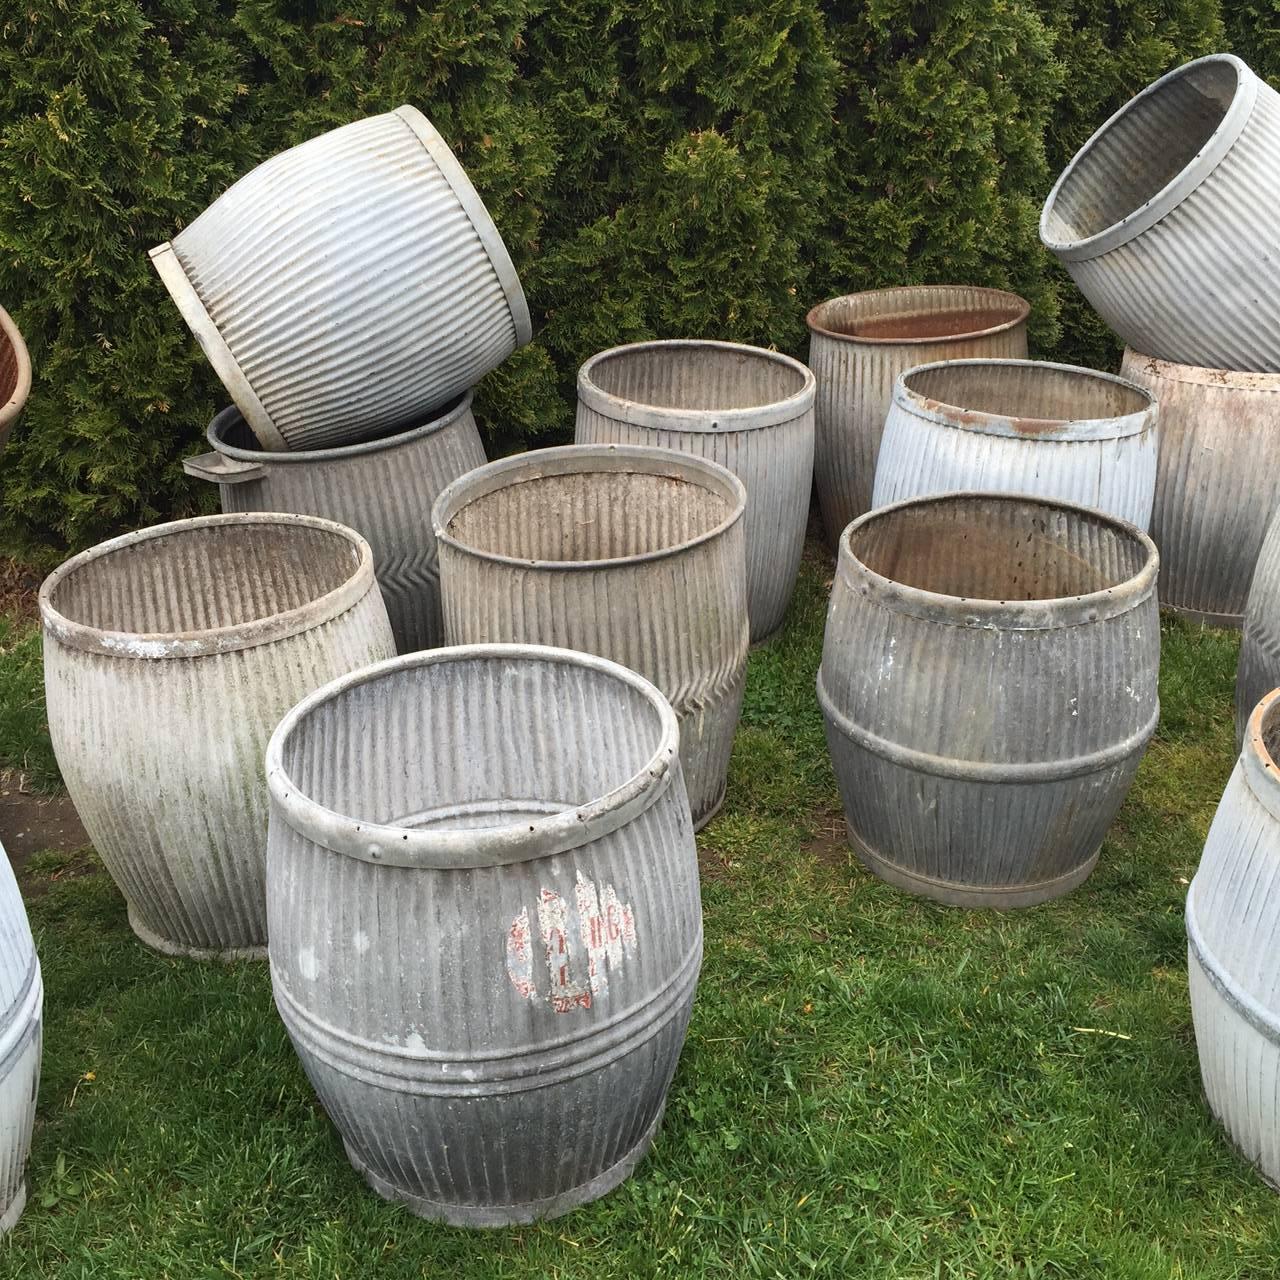 Vintage wash tubs in zinc, perfect planters.